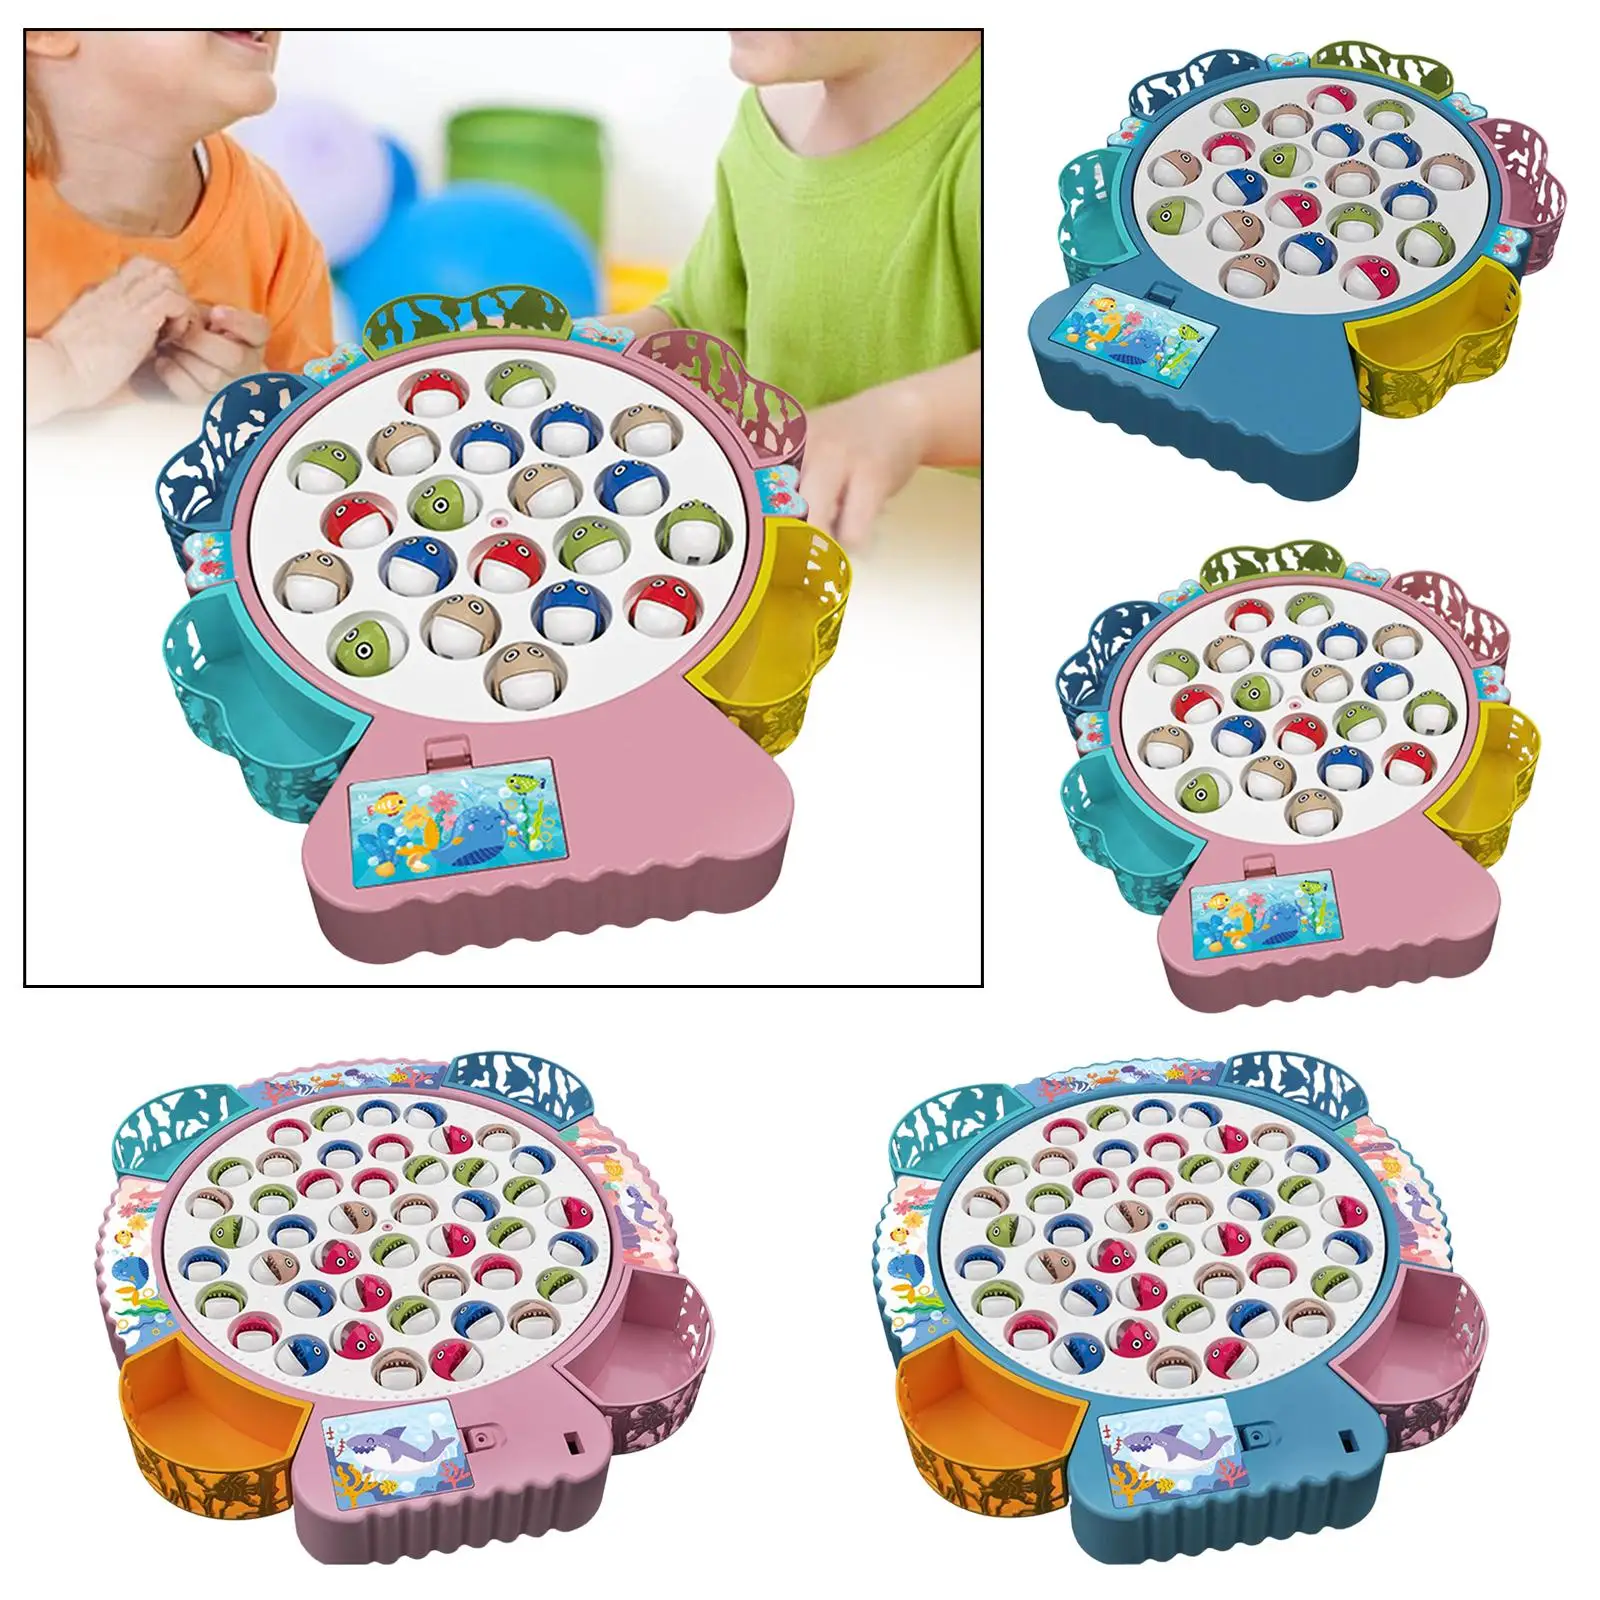 Fishing Game for 1-4 Player Birthday Gifts Electric Fishing Toy Role Play for Backyard Preschool Kid Family Age 3 4 5 6 7